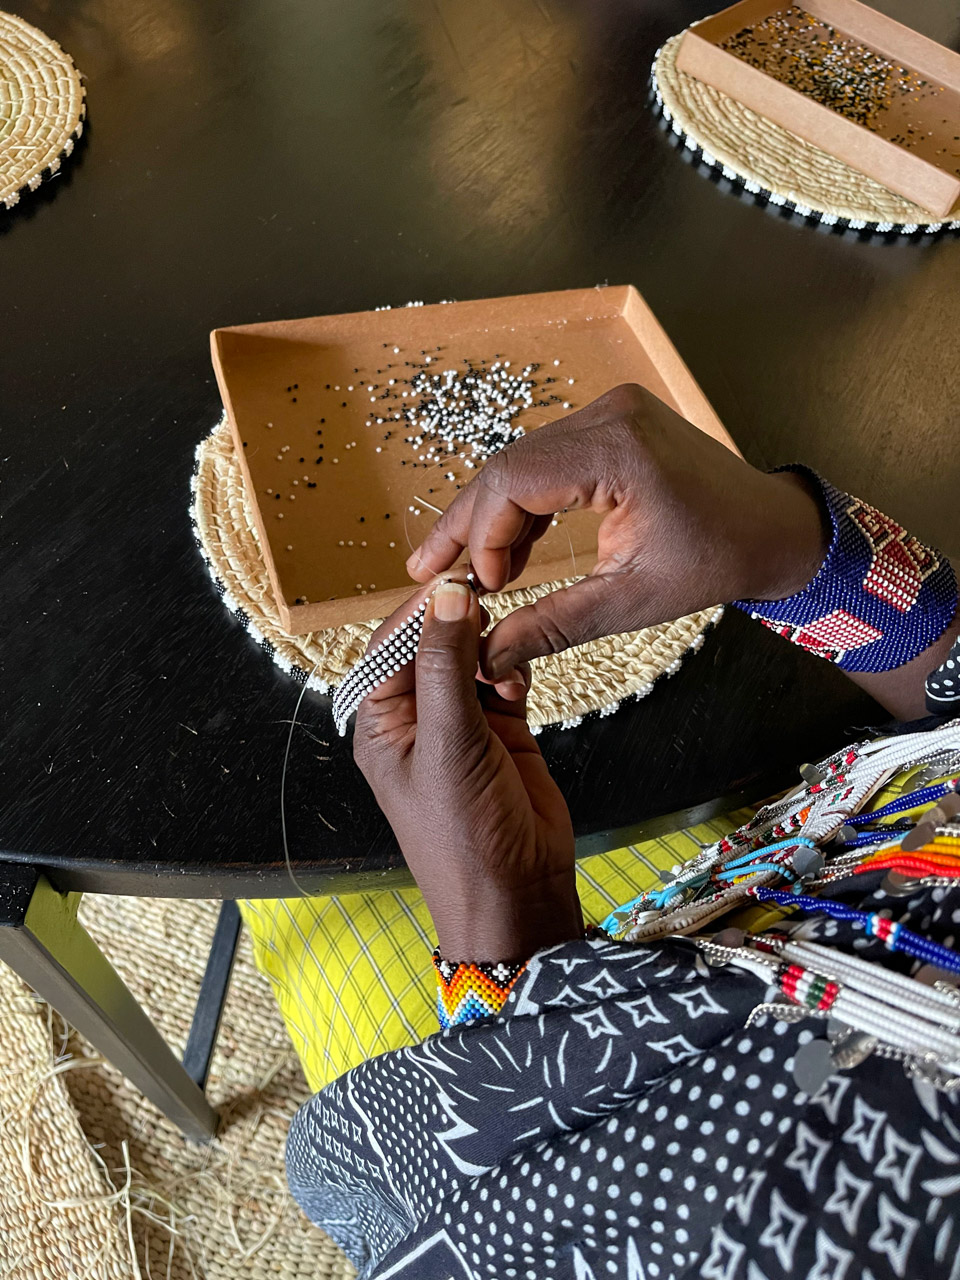 After years of practice, beading comes easily to them